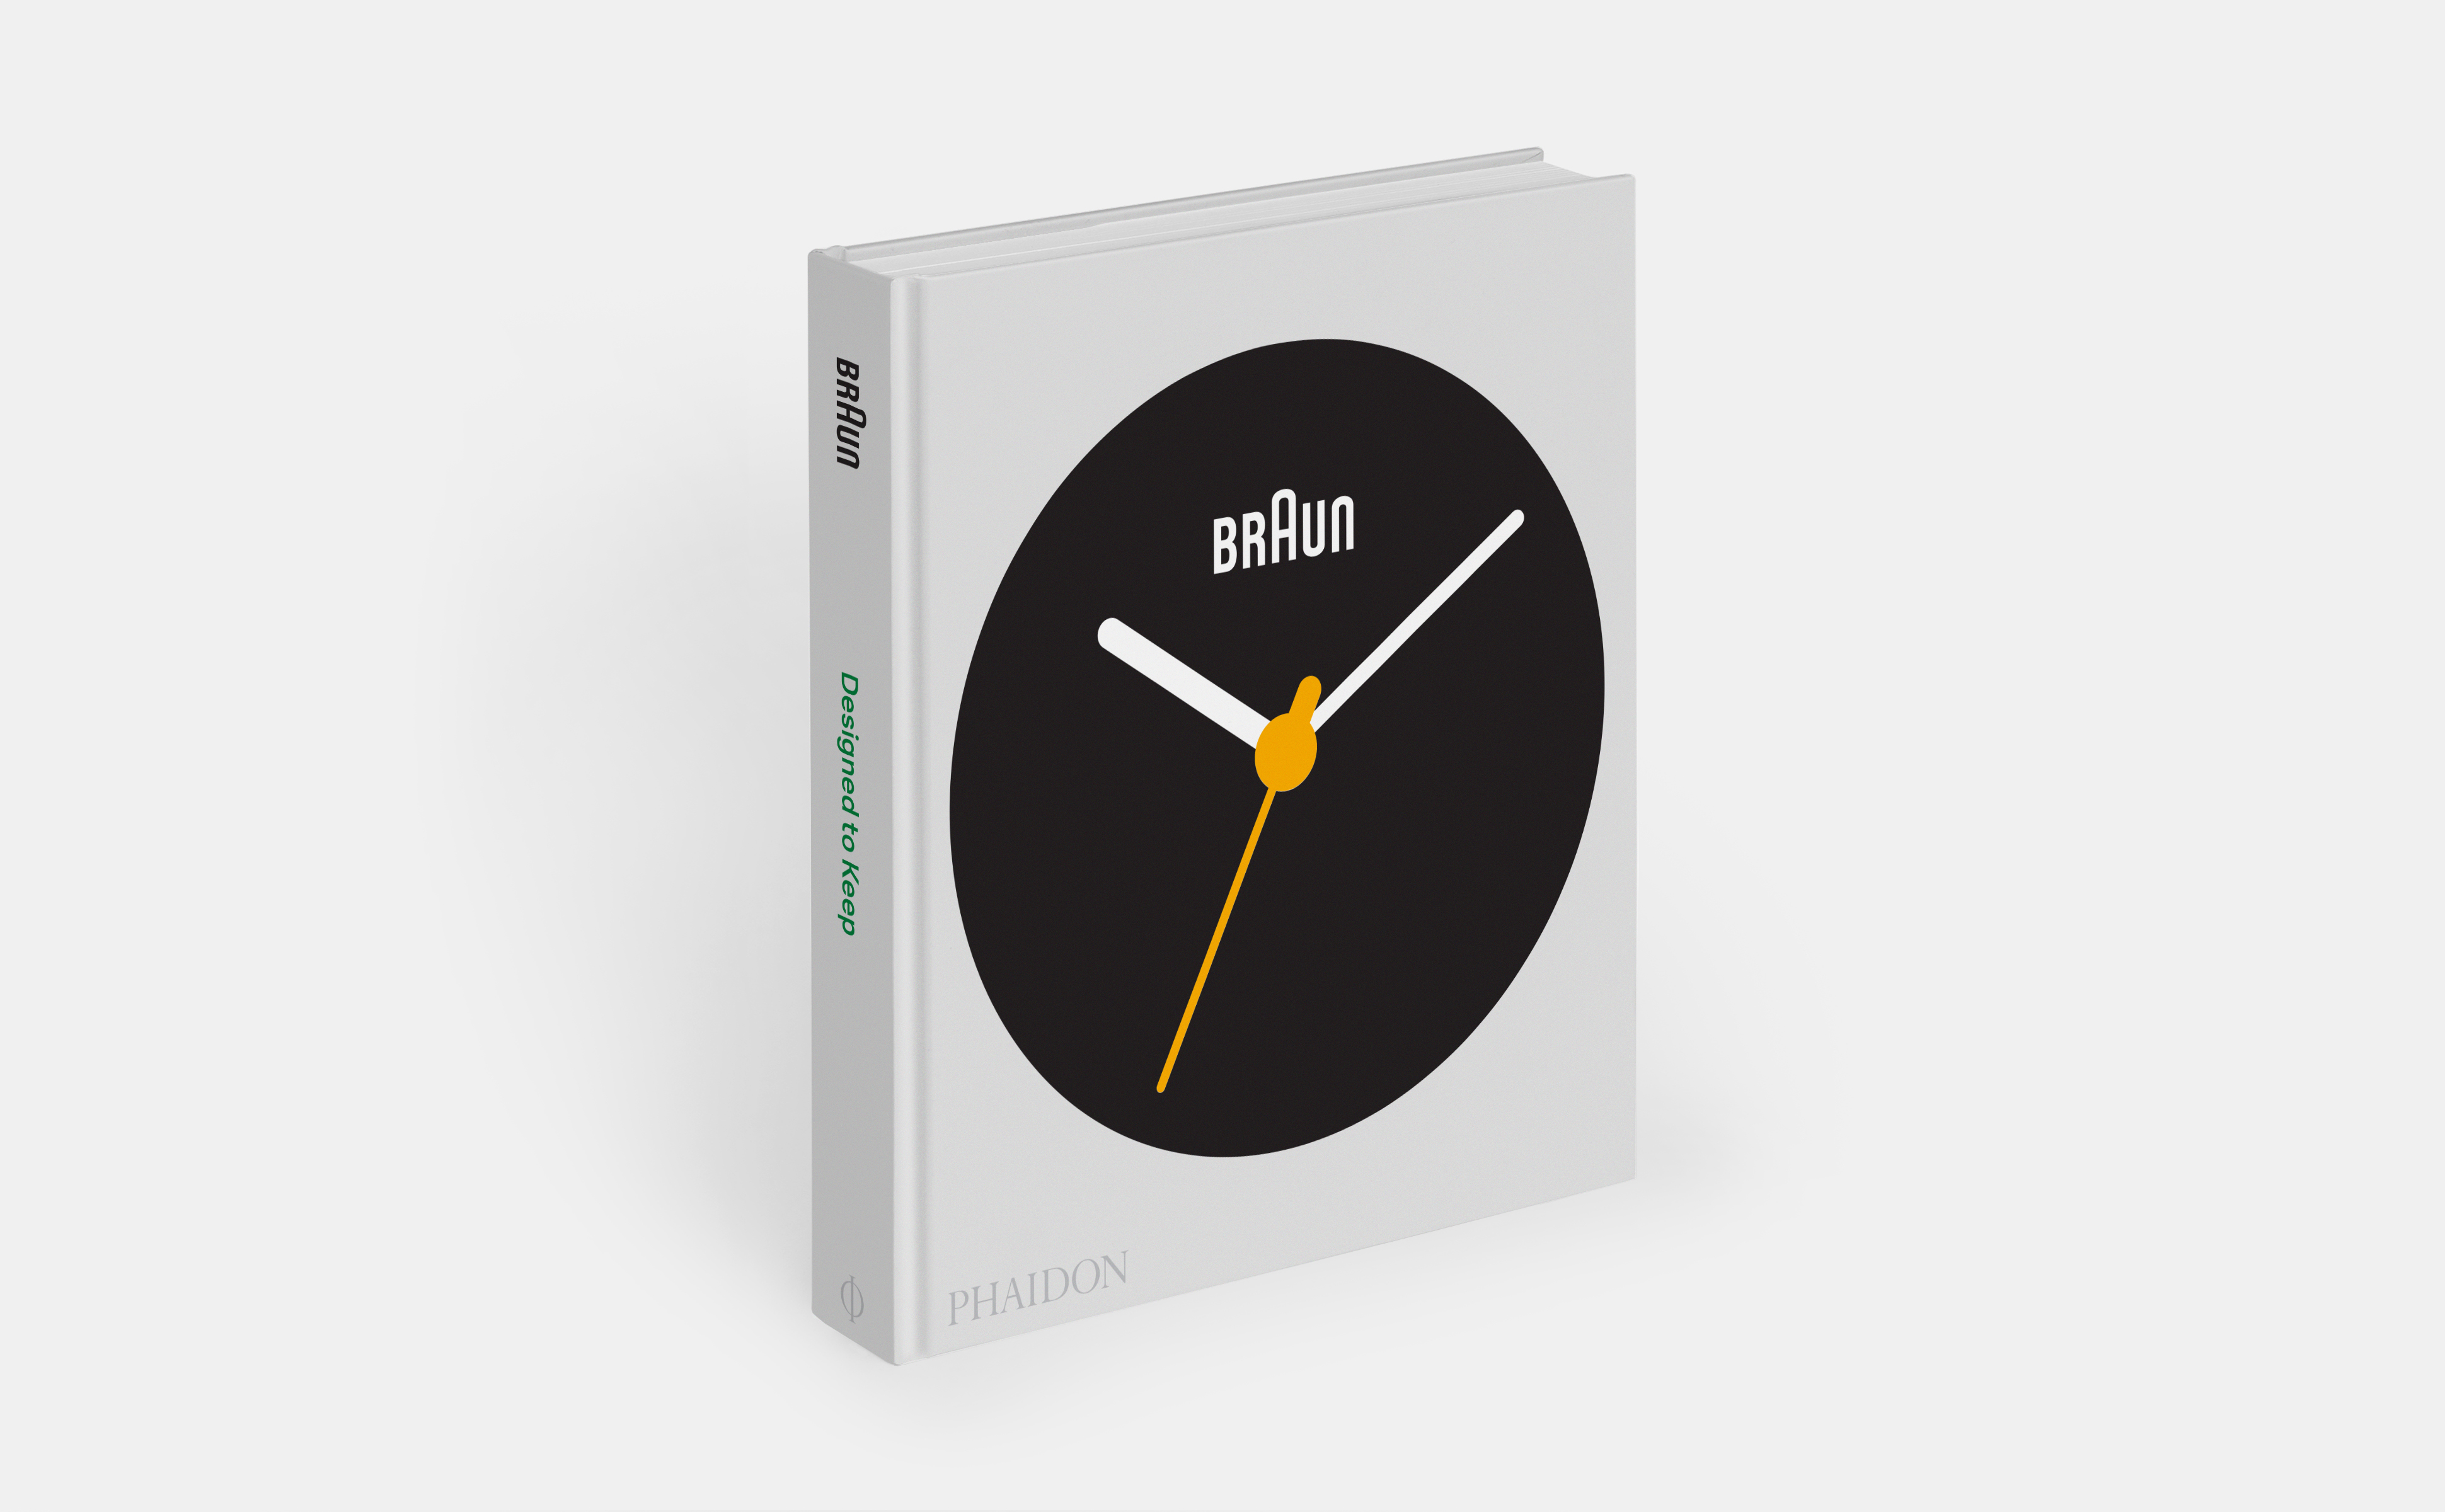 minimalist light gray book with large black, white, and yellow Braun clock on front cover